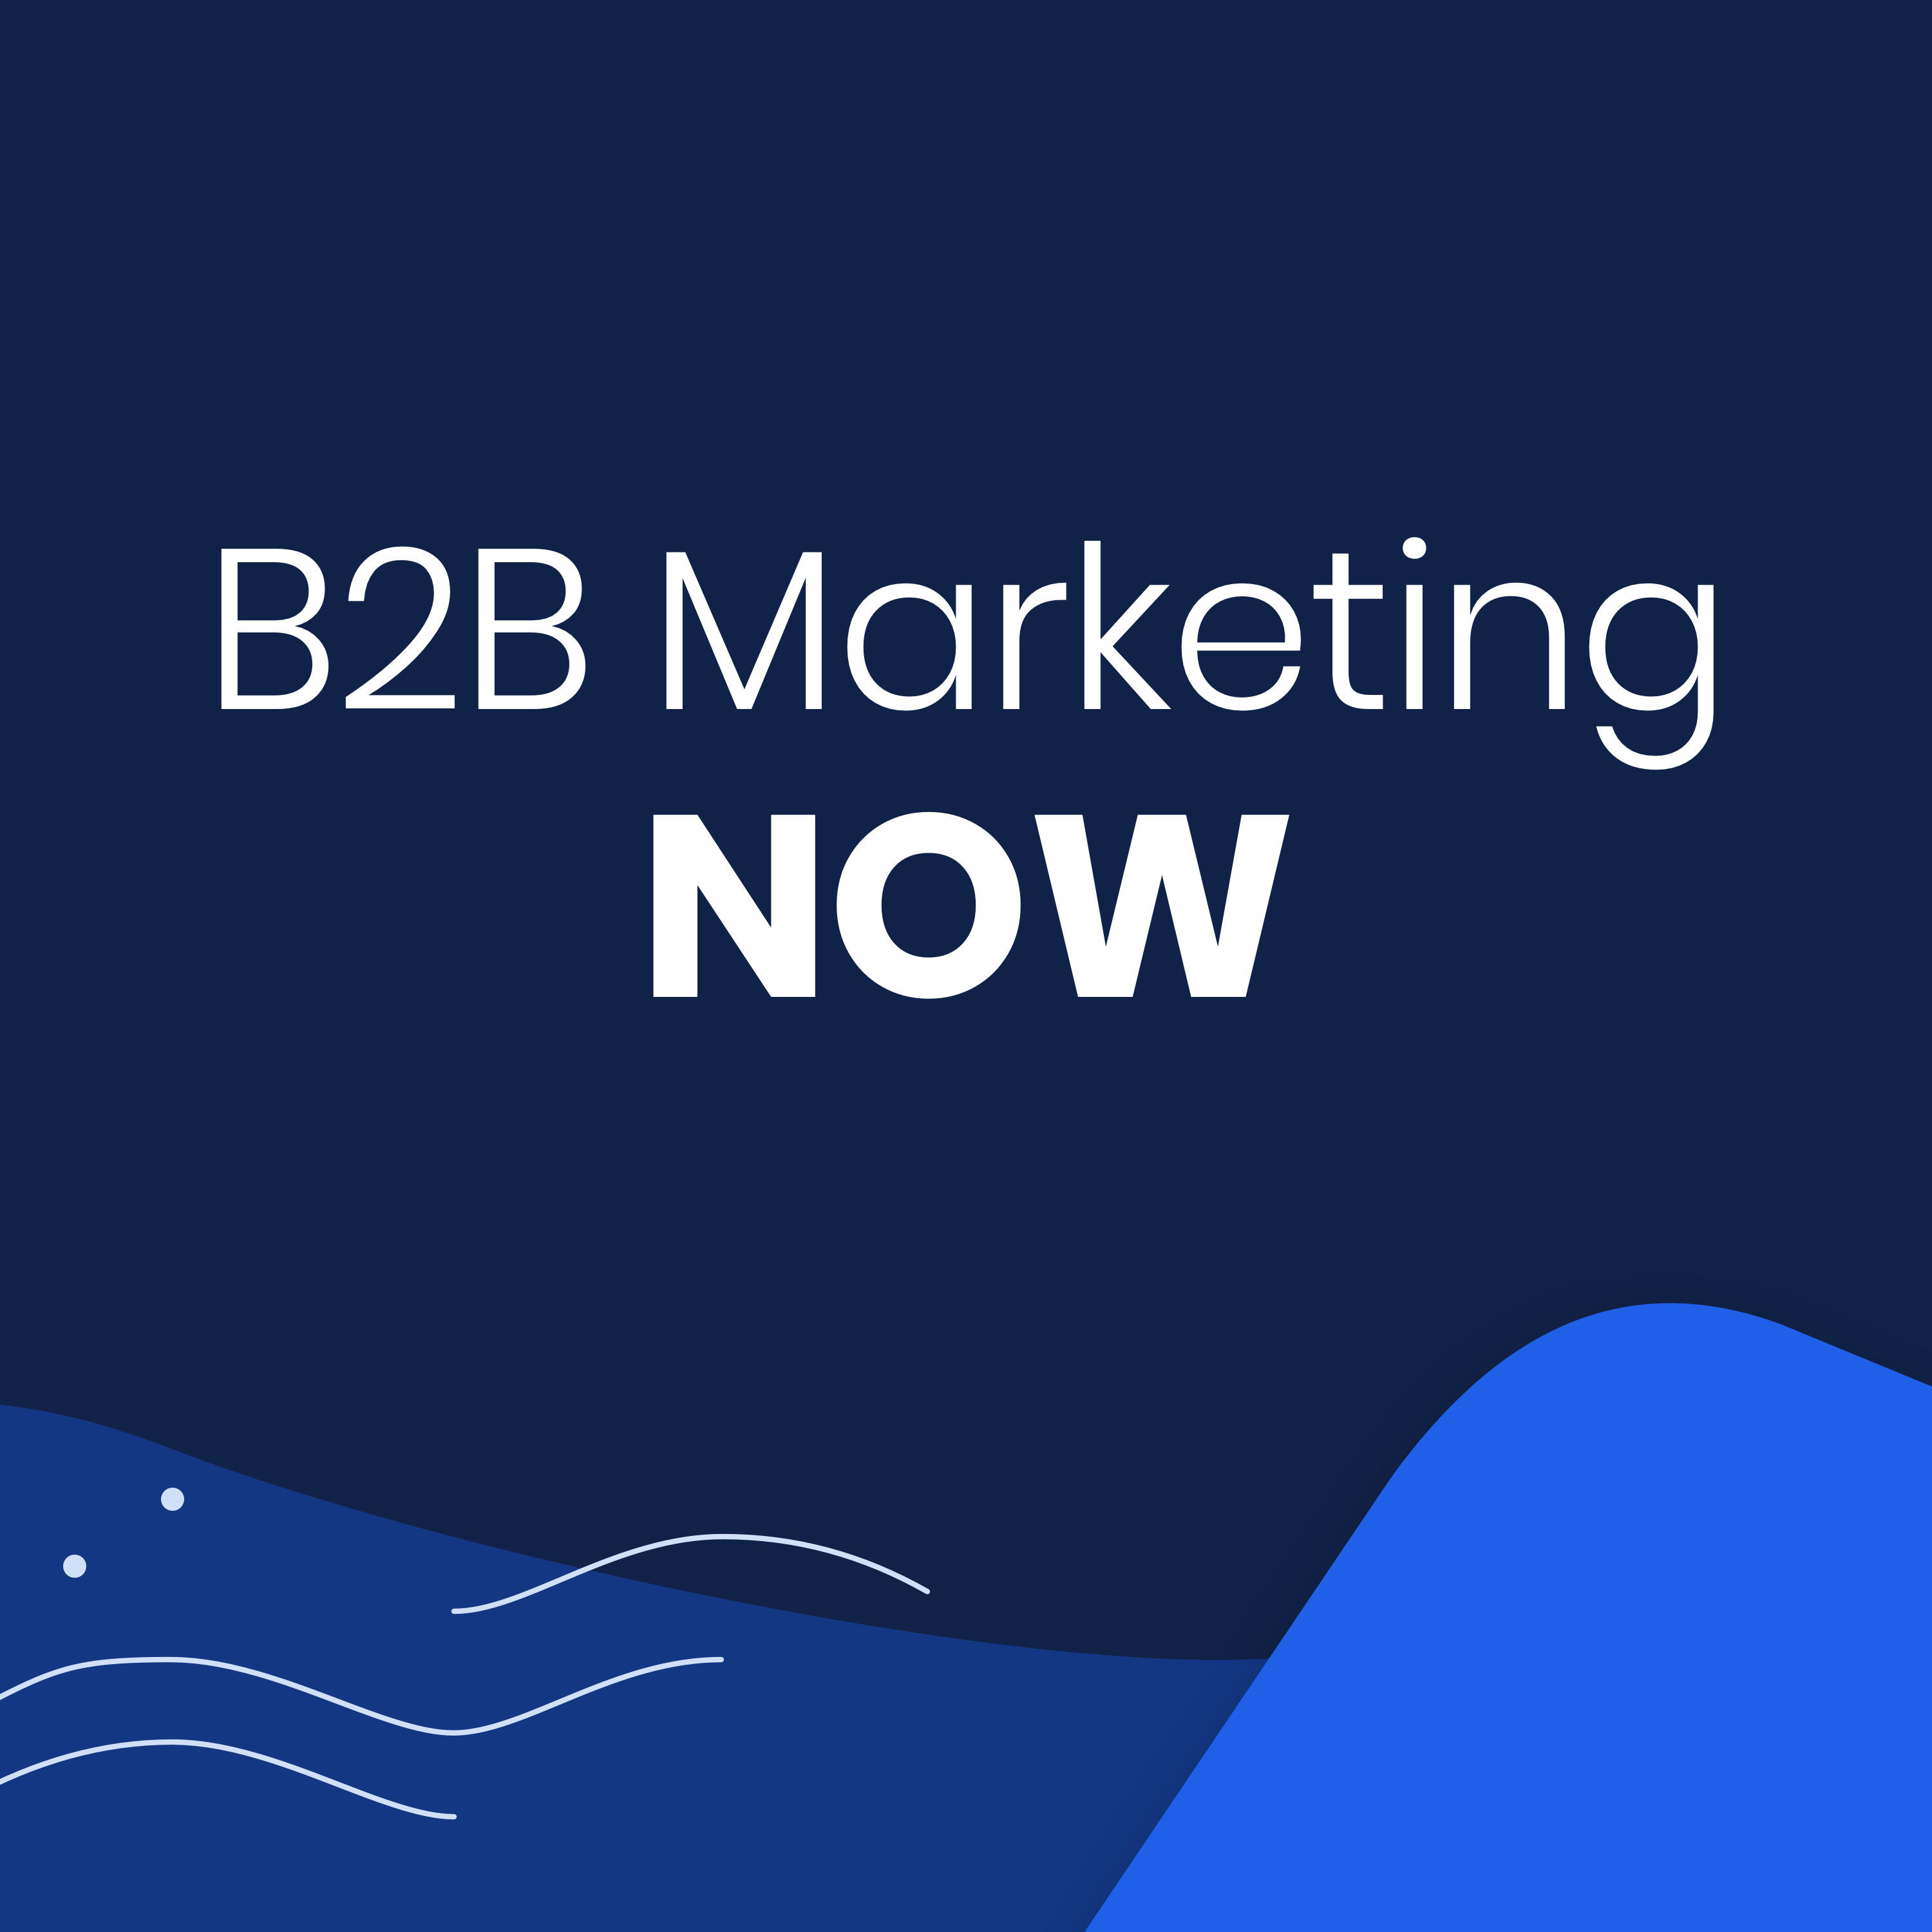 A highlight from Larissa Gaston on Keeping Up With the Speed of B2B Business